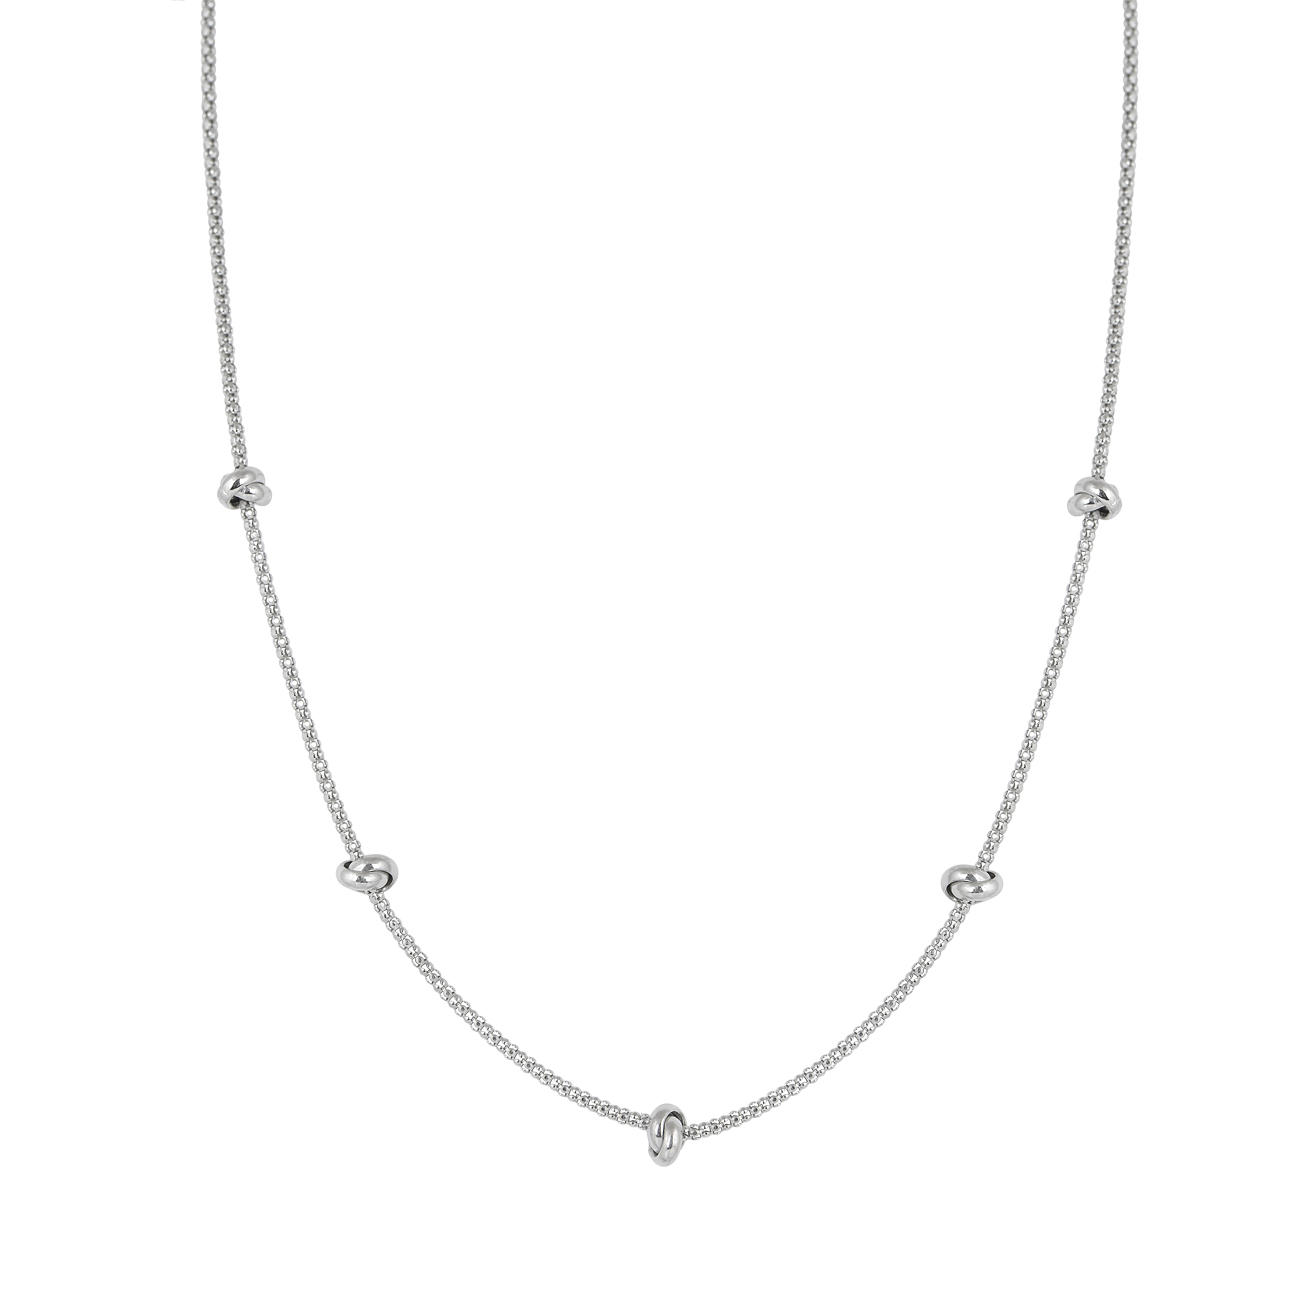 Silver chain necklace with small knots at intervals. Ideal to be worn at all times. Chain length 40 to 45 cm.